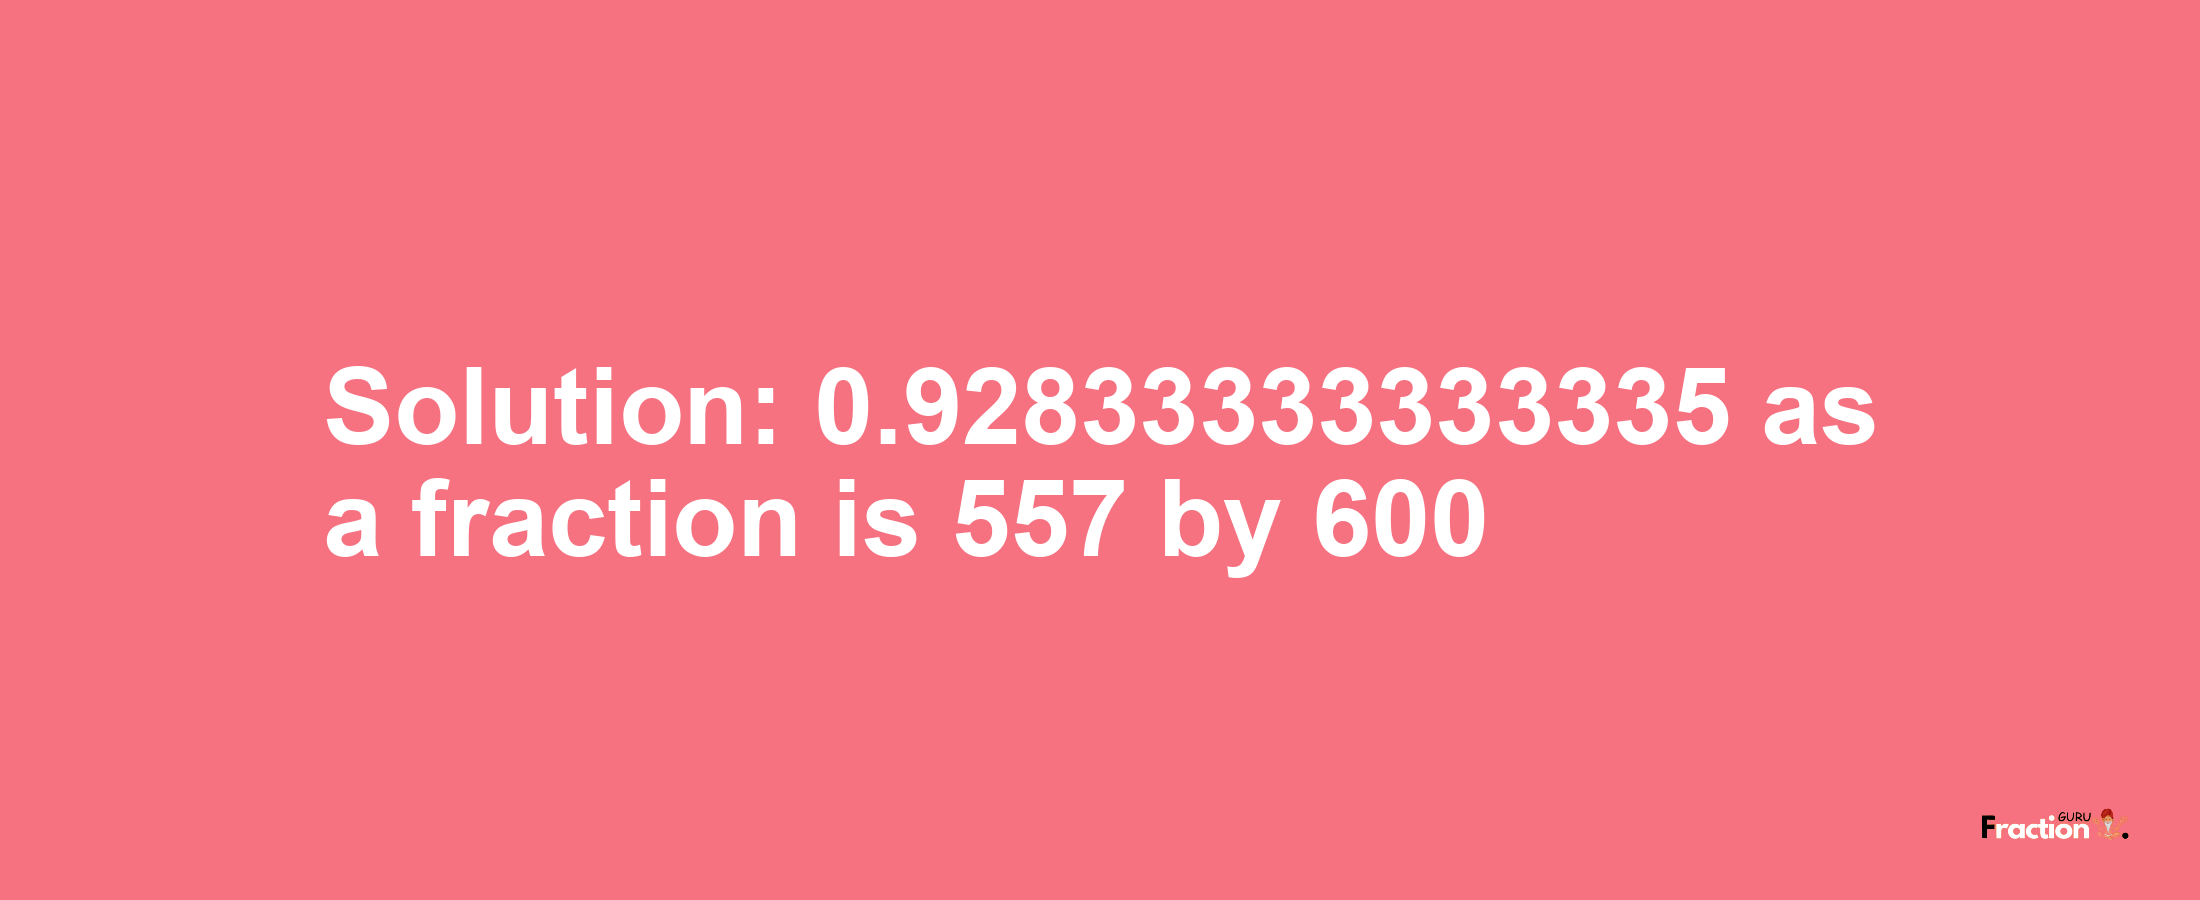 Solution:0.92833333333335 as a fraction is 557/600